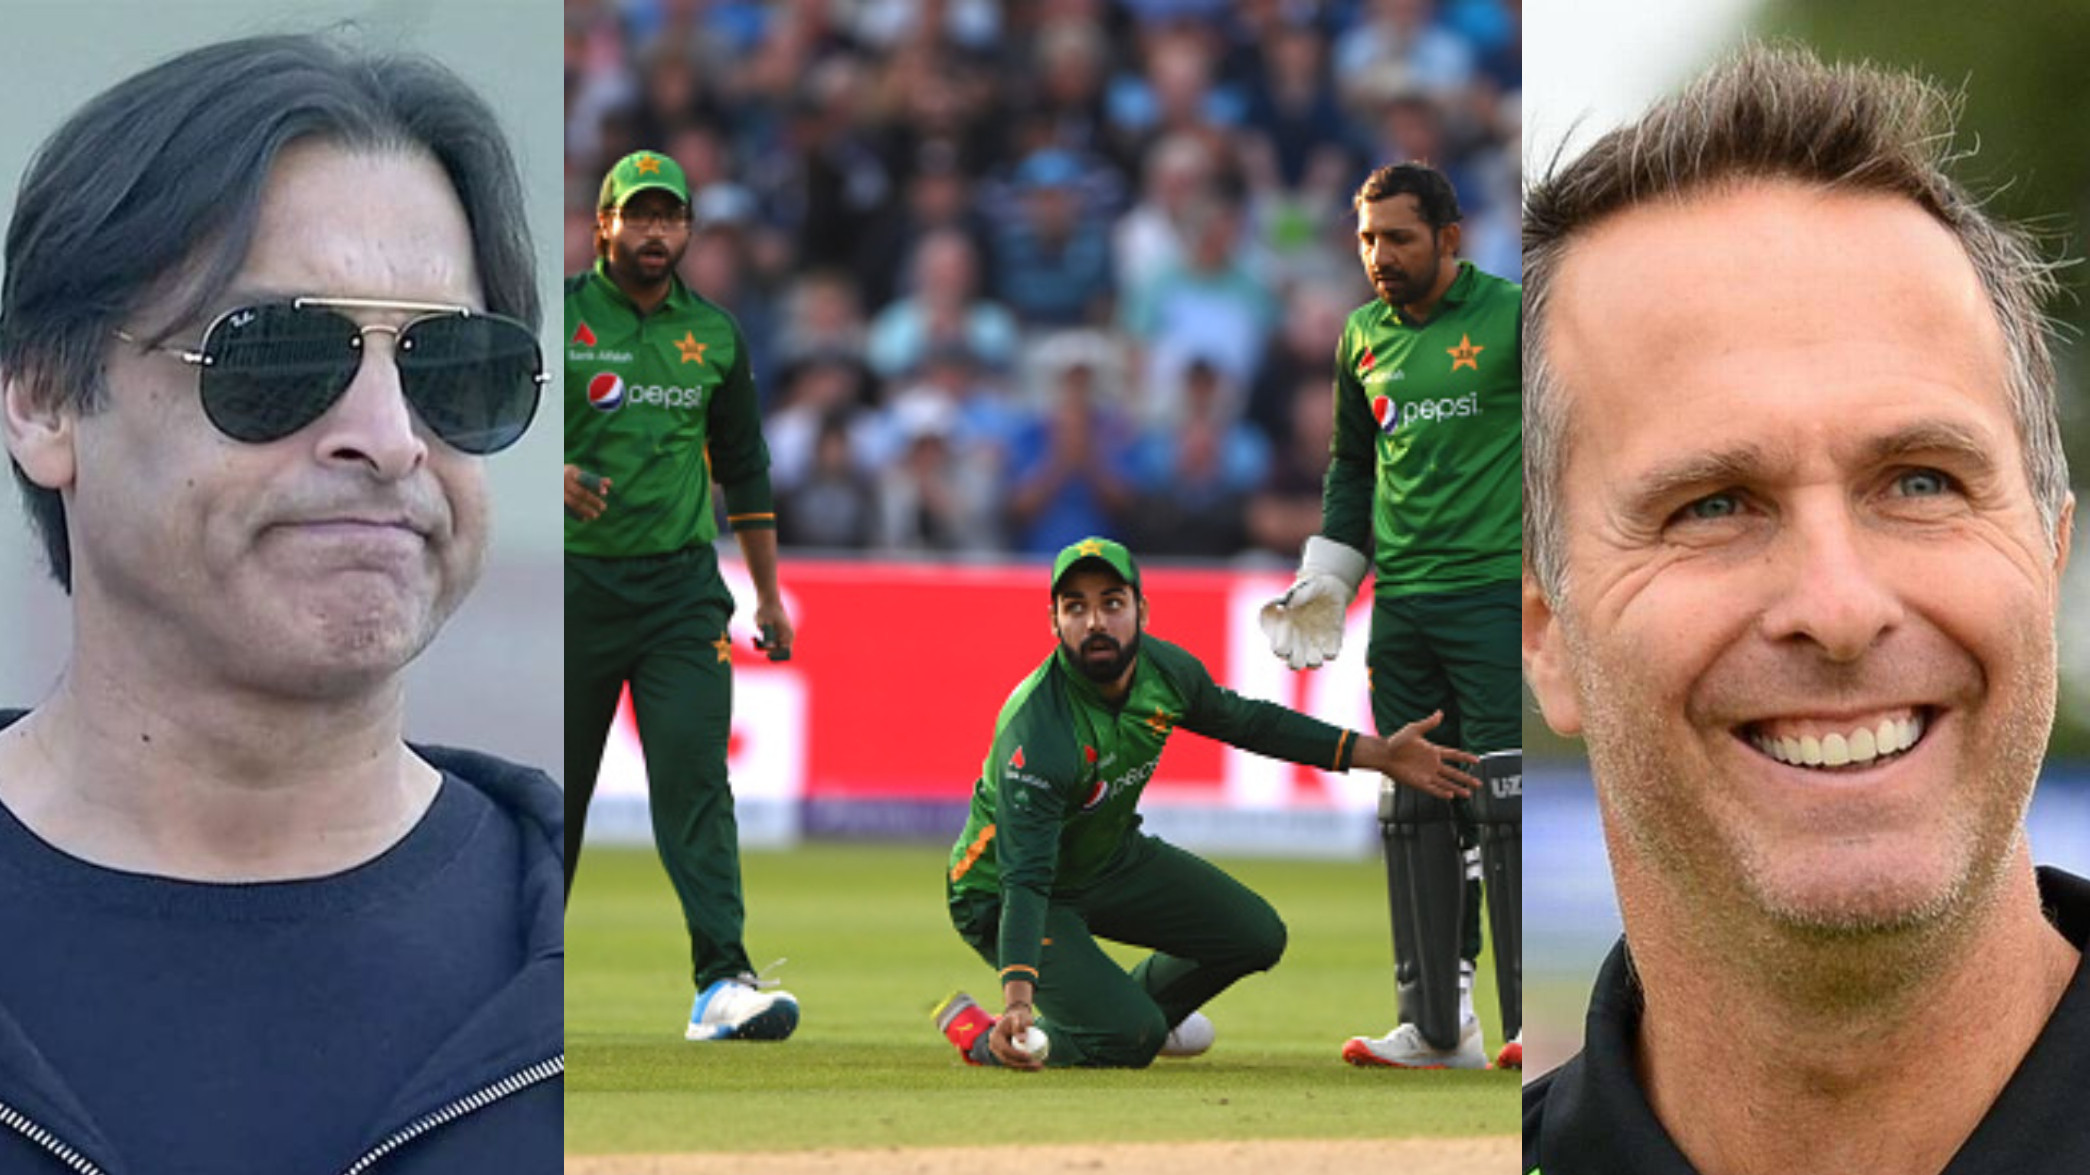 ENG v PAK 2021: Cricket fraternity reacts to Pakistan losing ODI series 3-0 to a second string England team